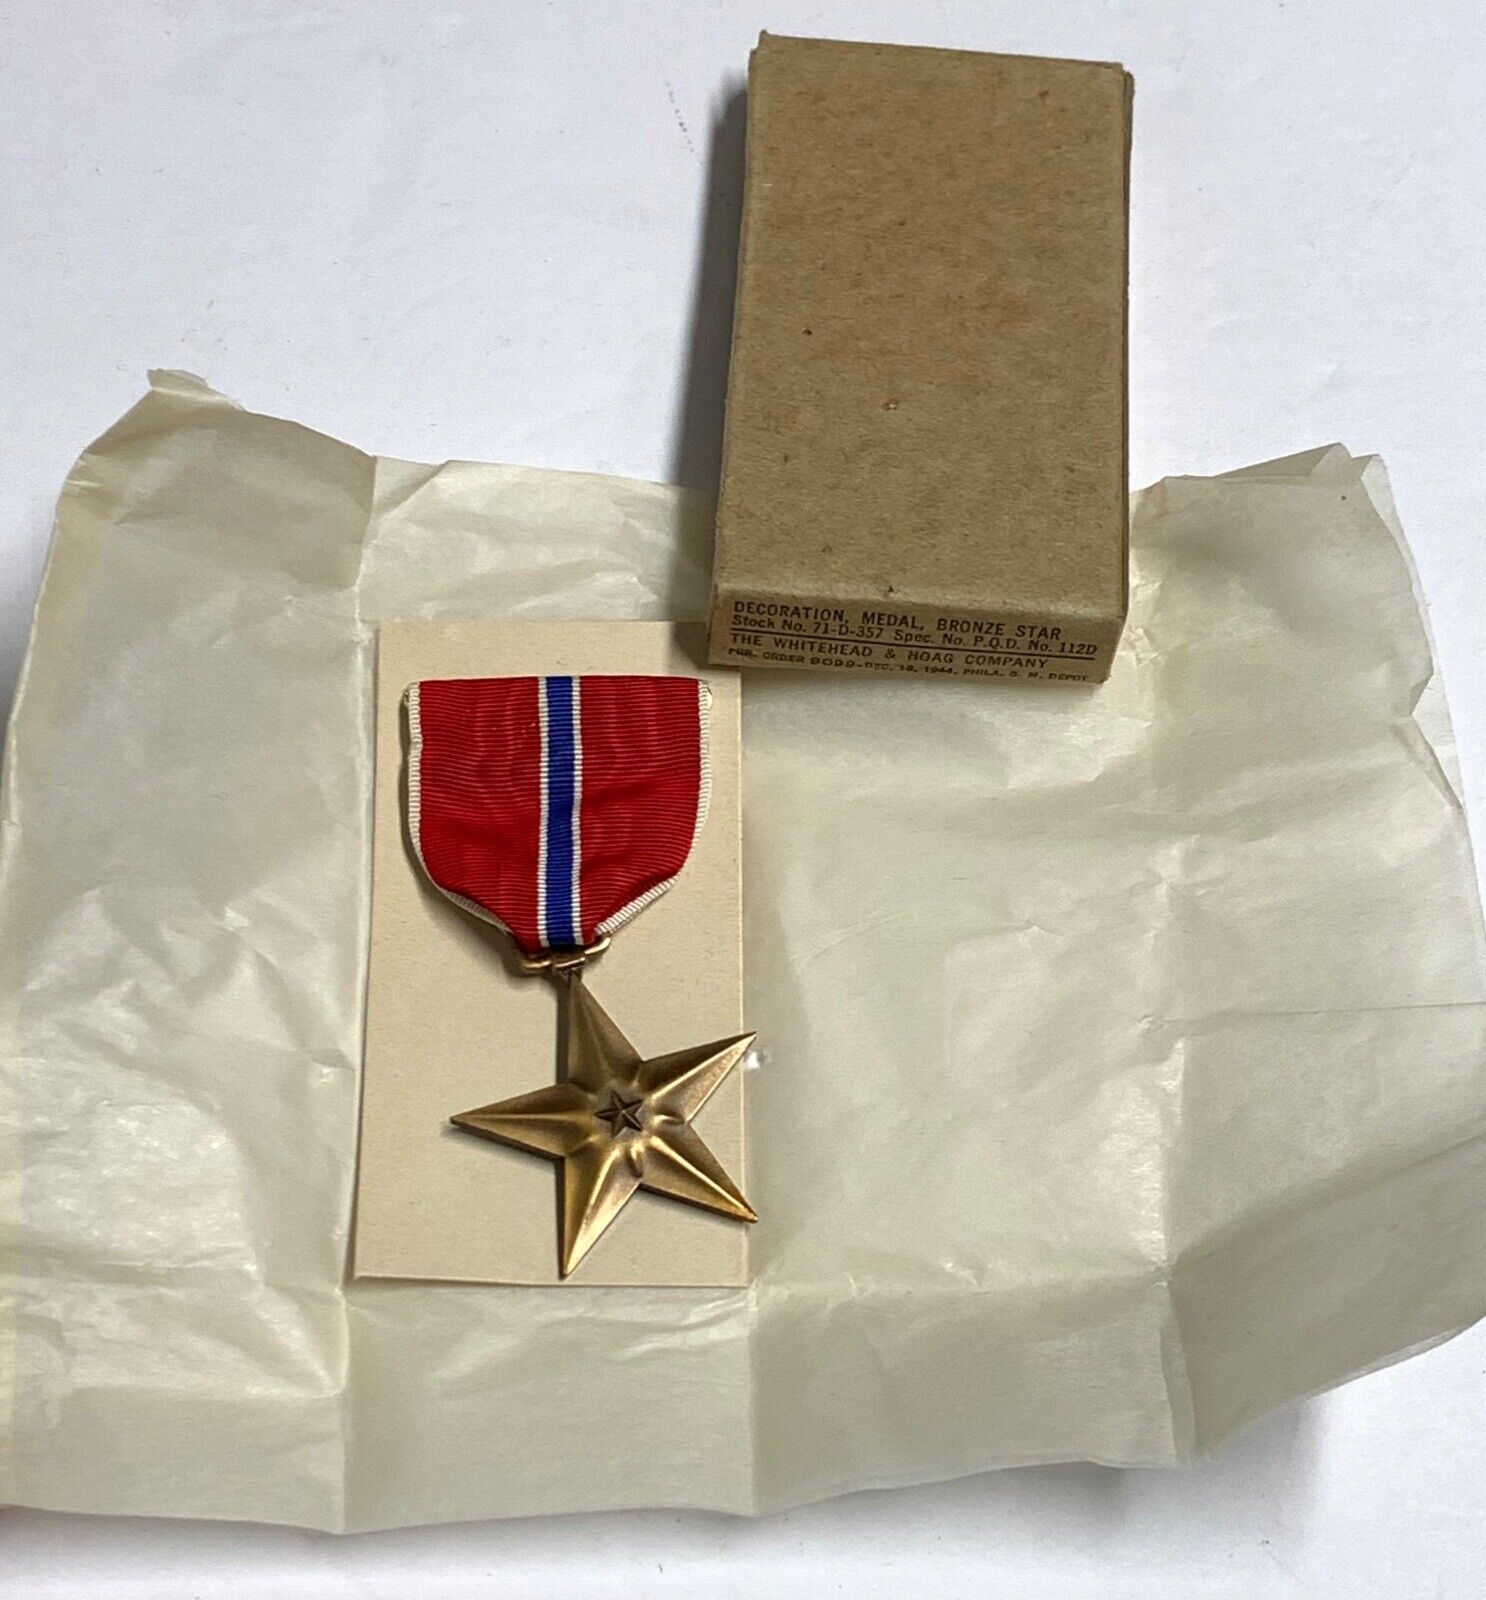 Orig WWII Slot Brooch Bronze Star Medal in 1944 Dated Original Box, Un-Issued